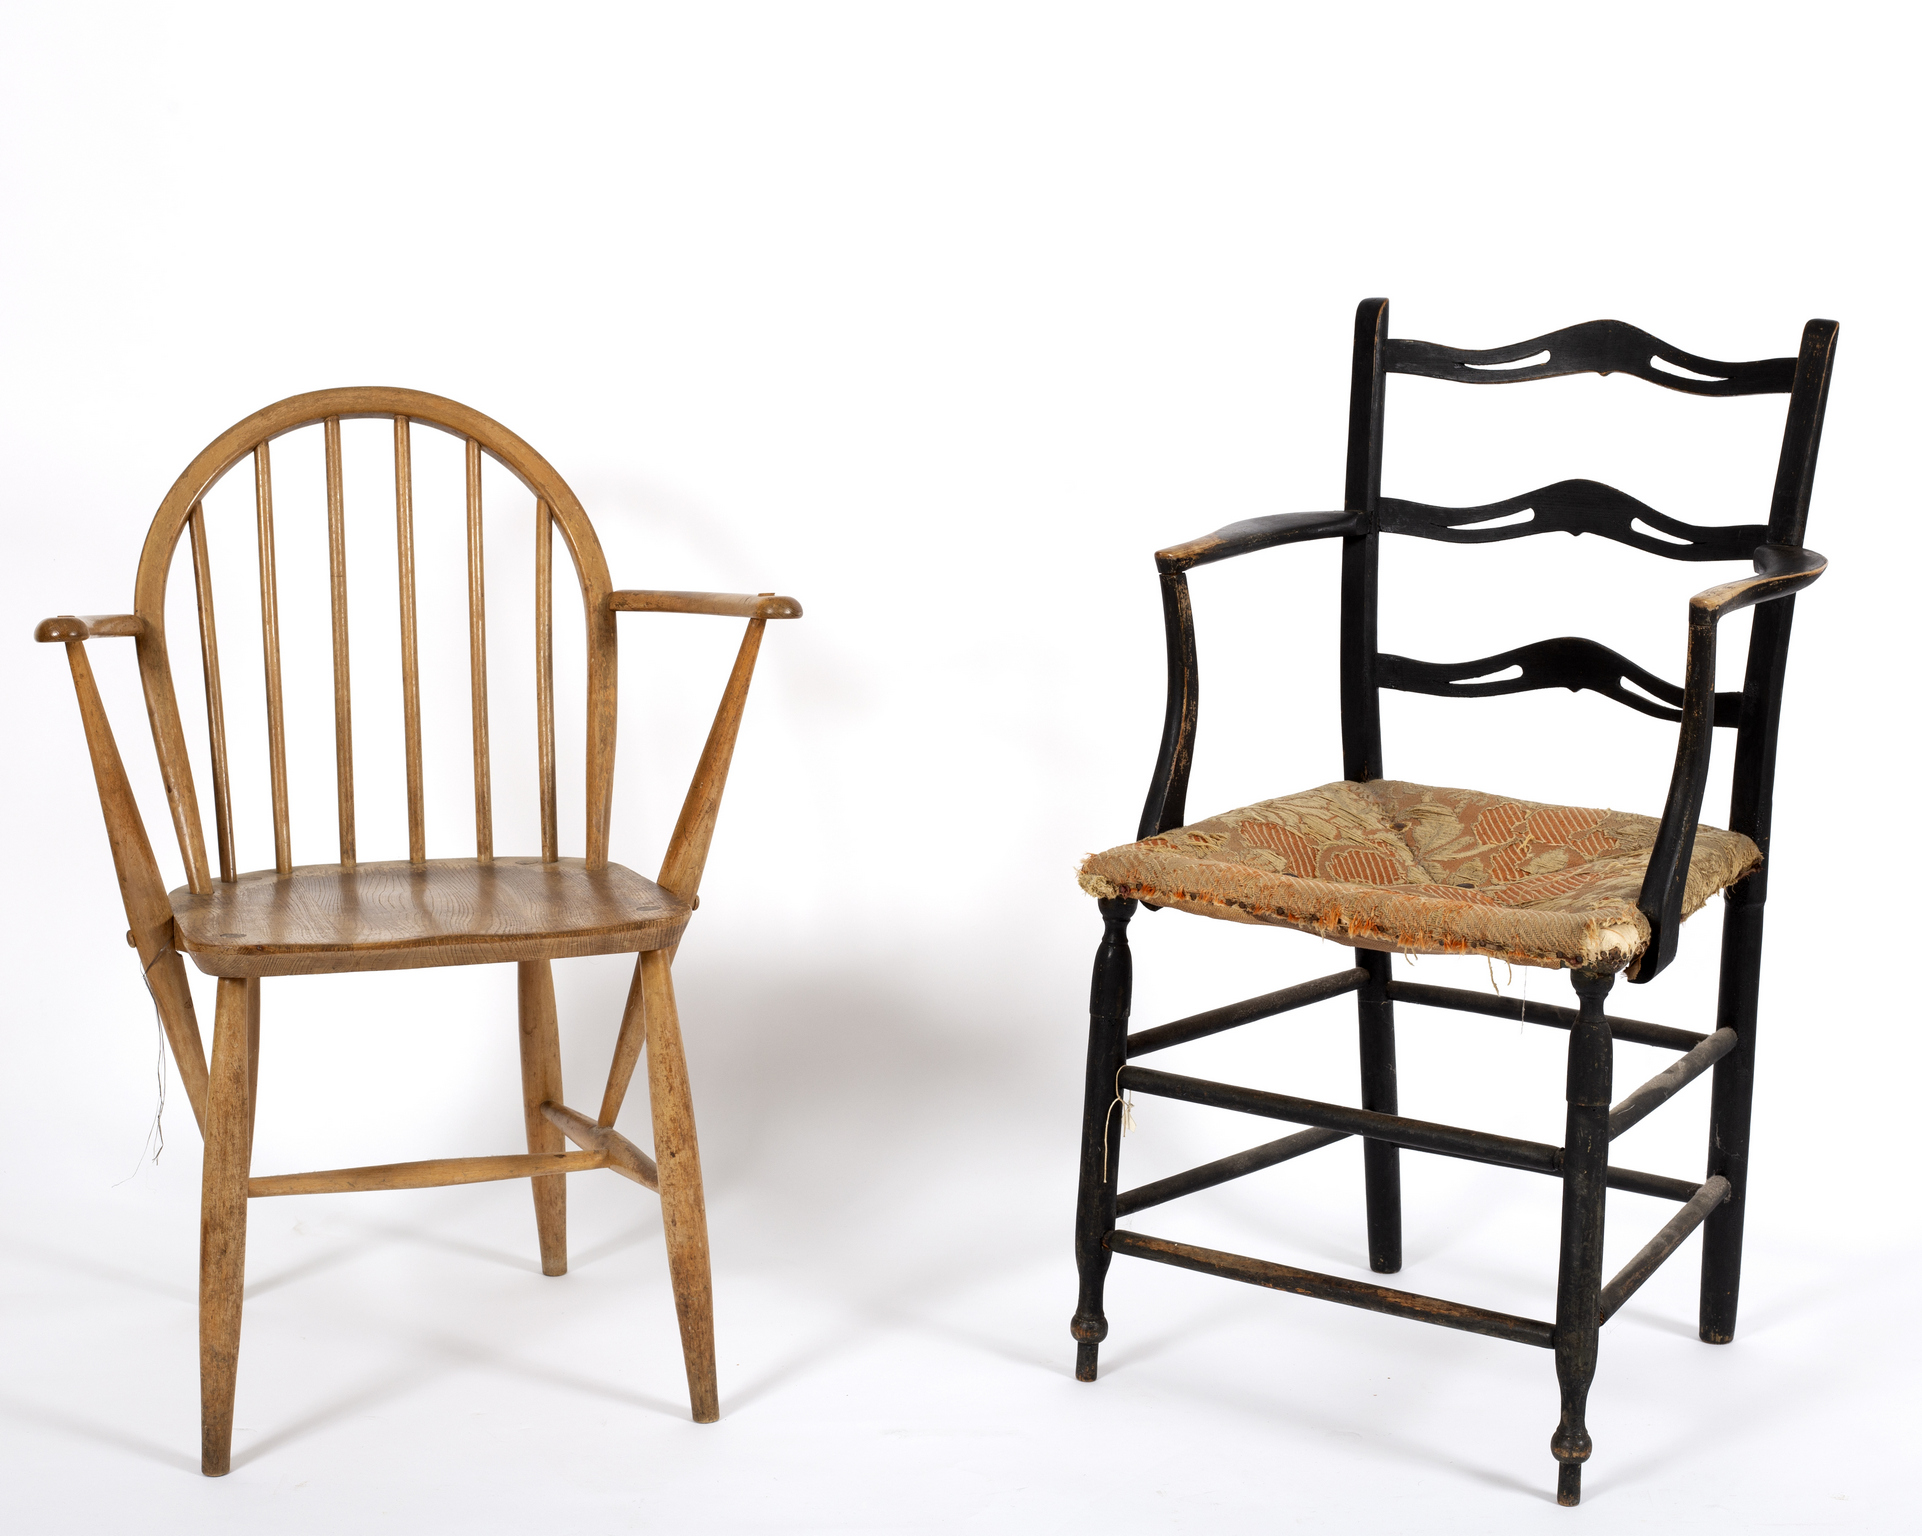 An Arts and Crafts style ebonised ladder back chair and an Ercol ash and elm Windsor chair